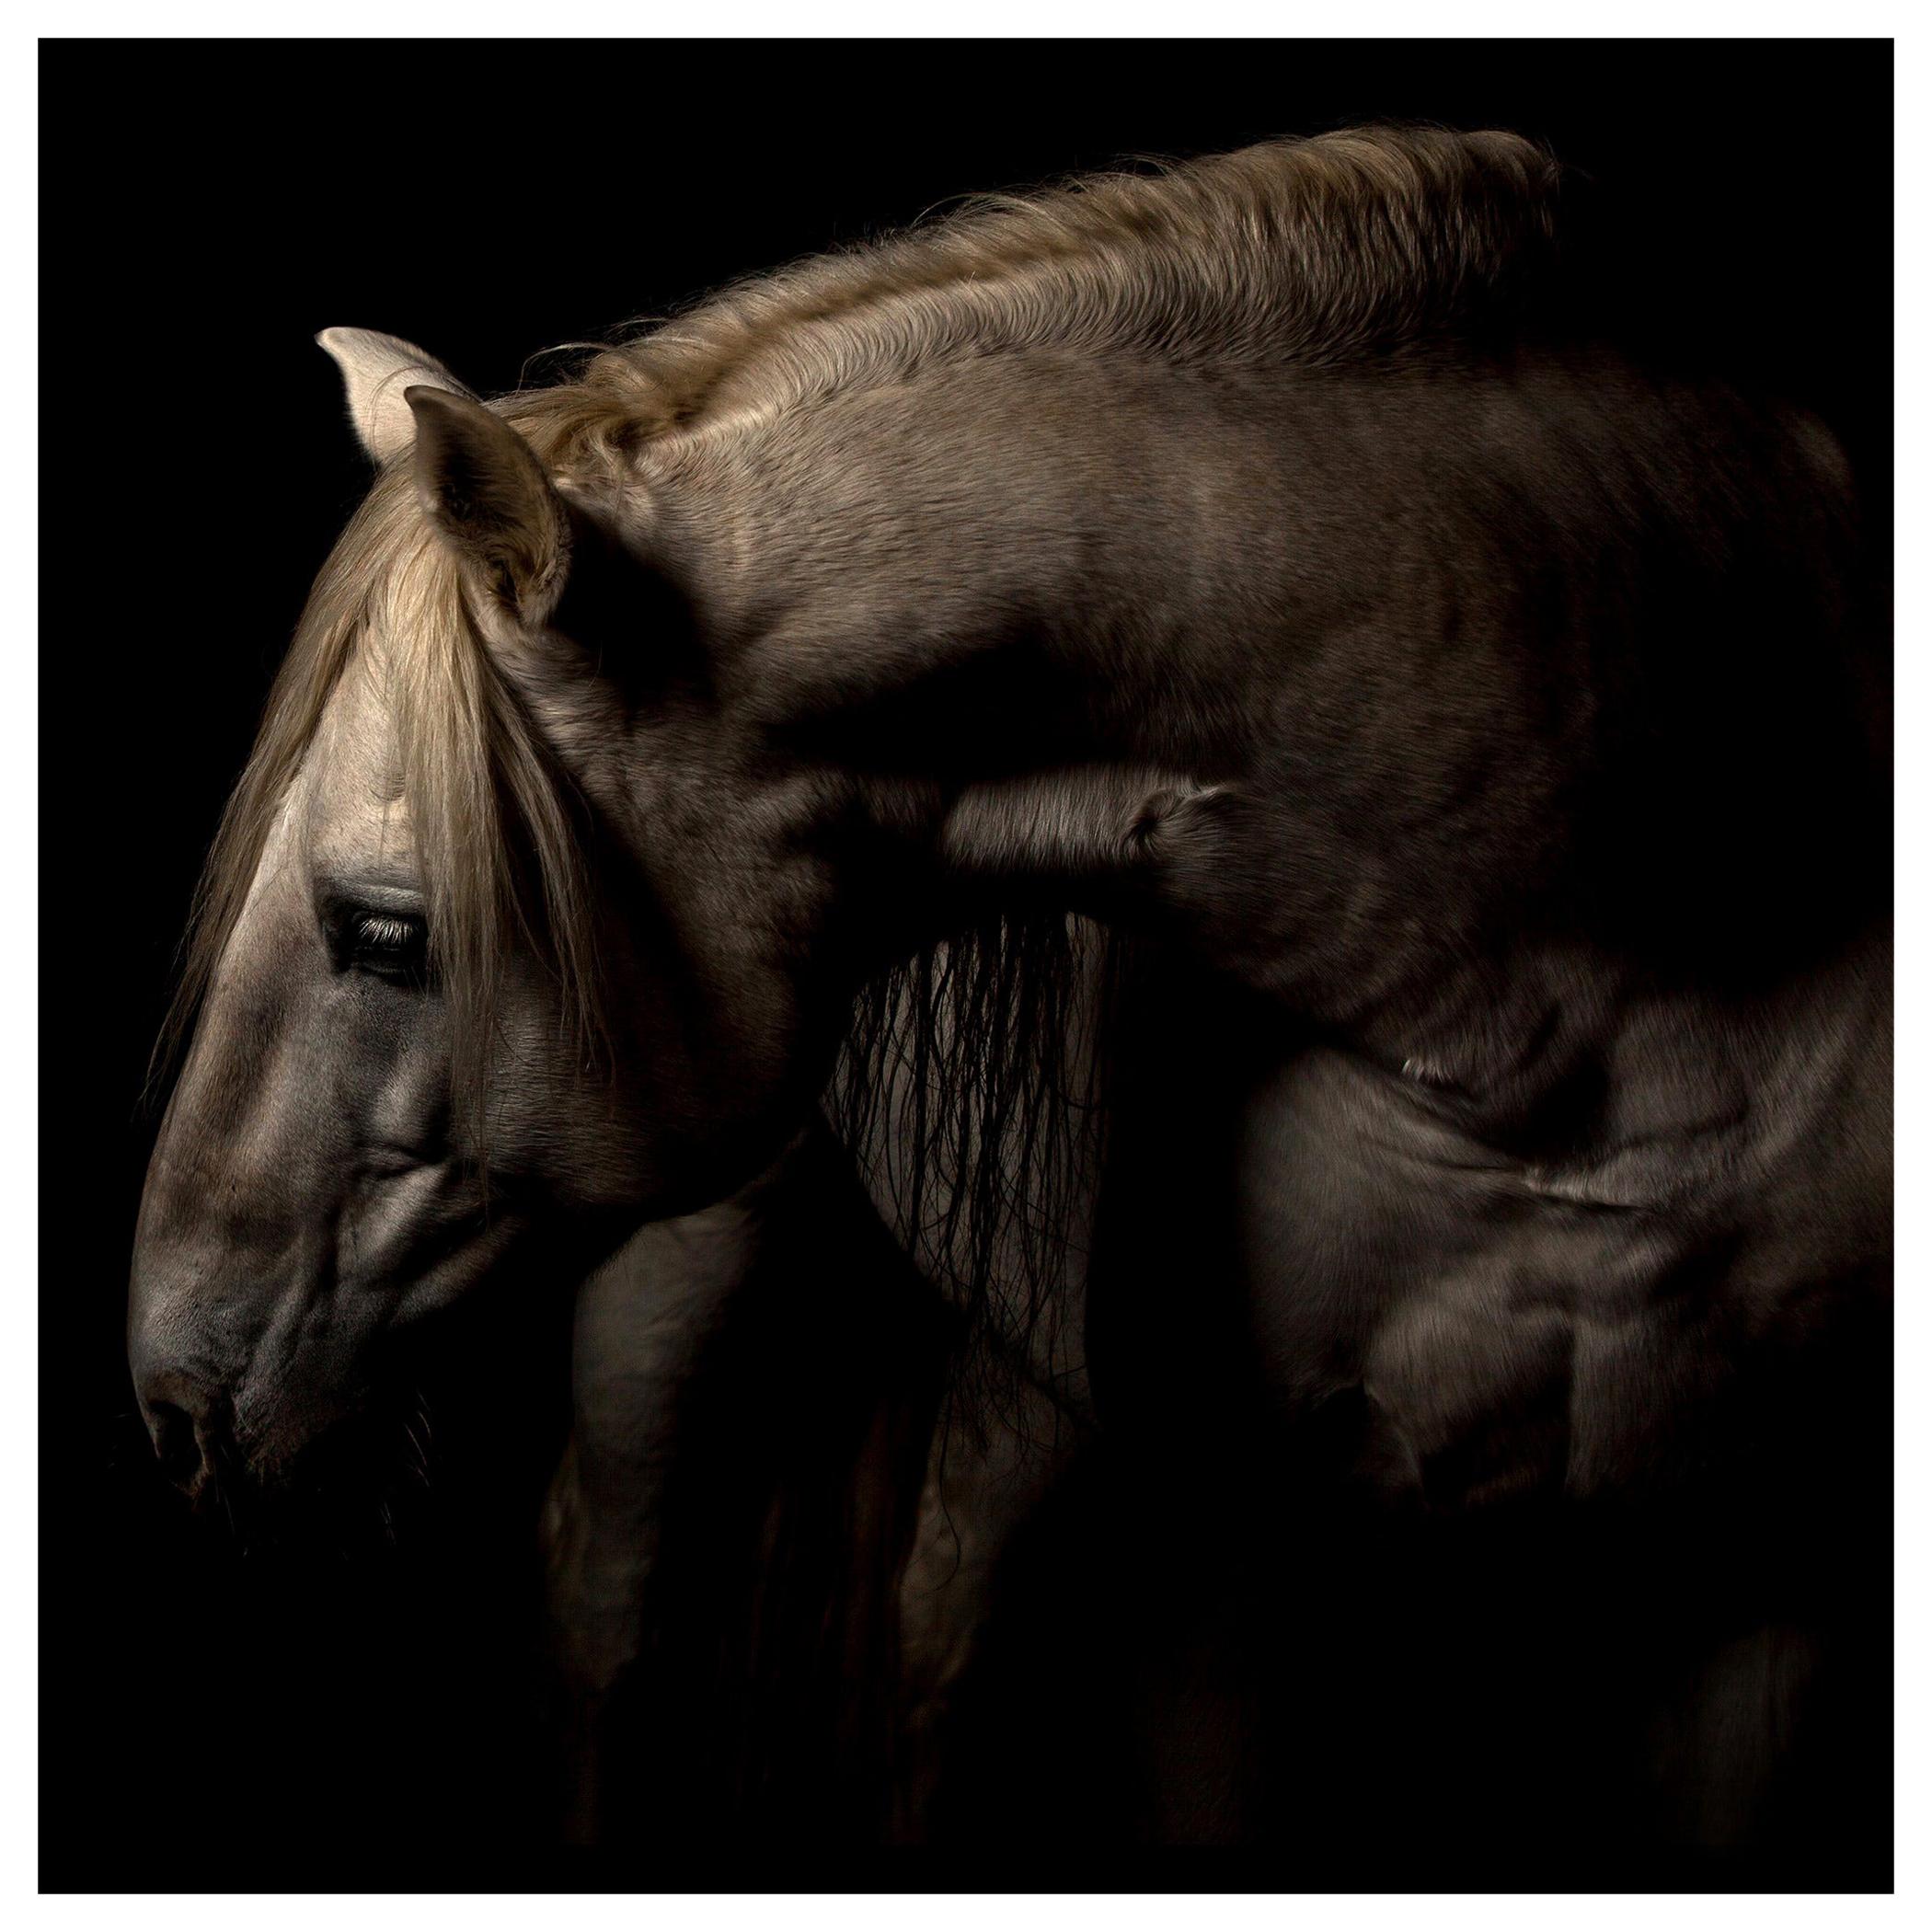 "Patience" Plexiglass Mounted Color Horse Photo by Lisa Houlgrave